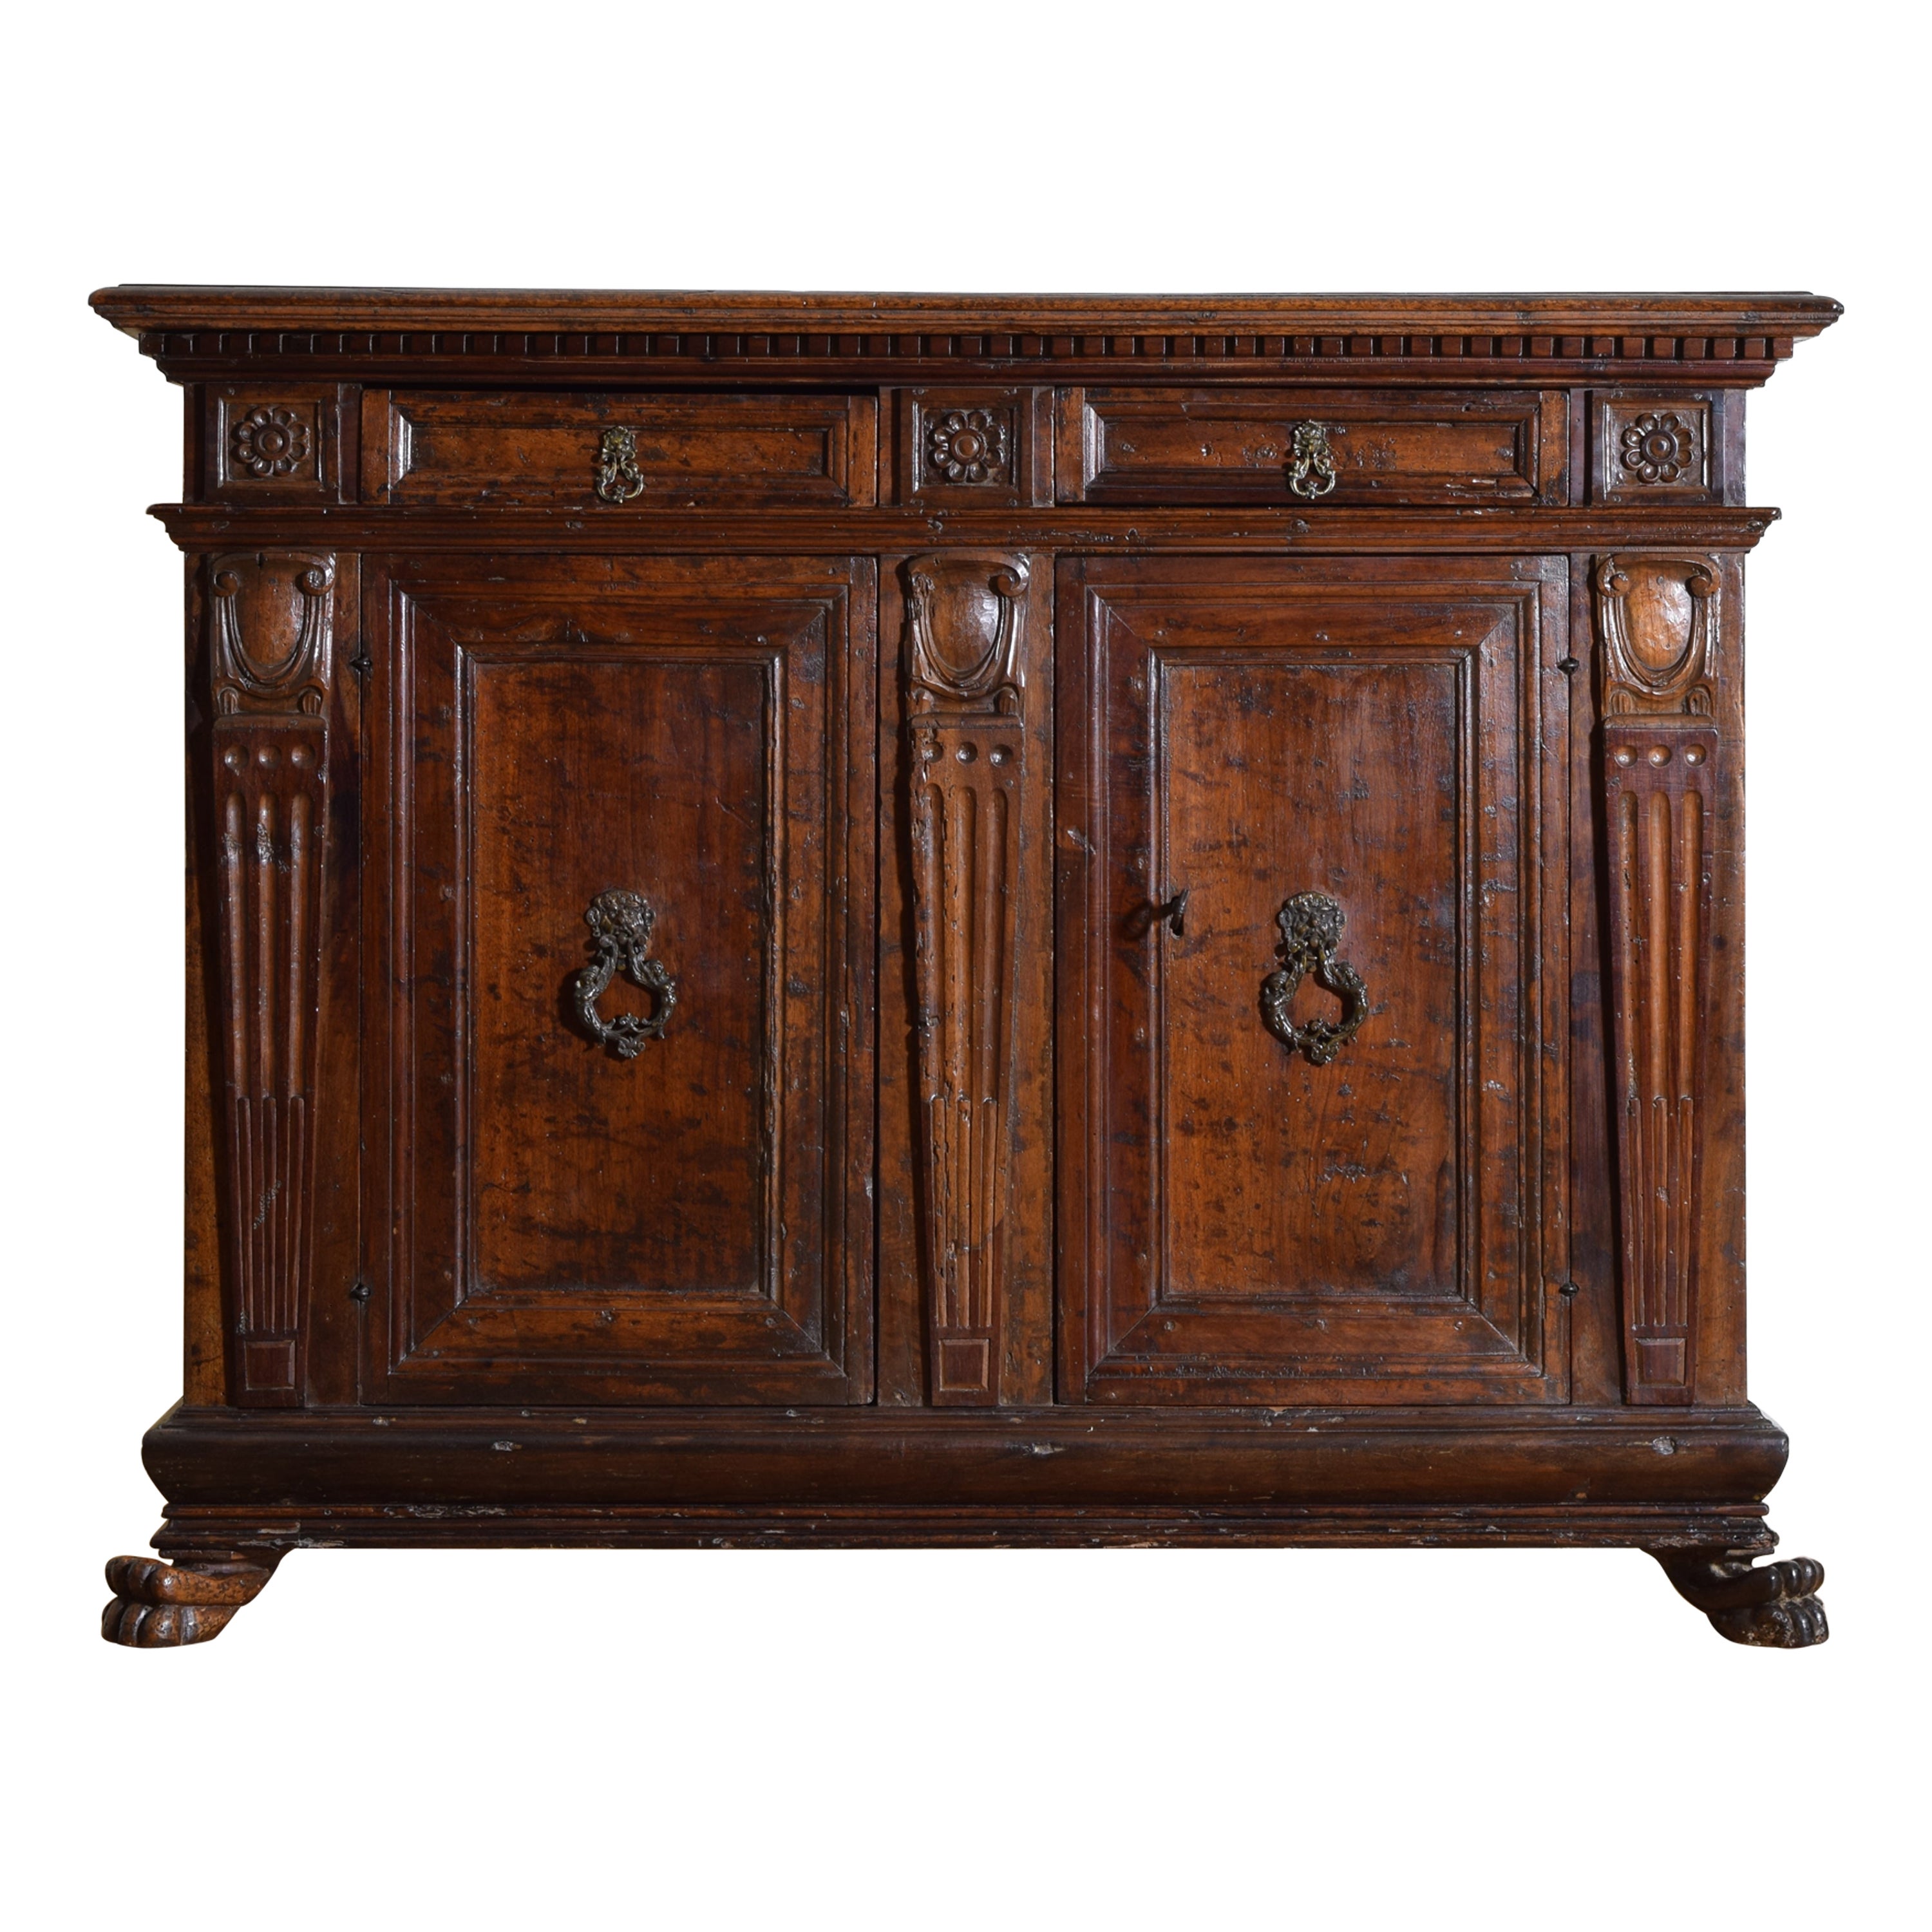 Italian Late Renaissance Carved Walnut 2-Drawer, 2-Door Credenza, 17th century For Sale